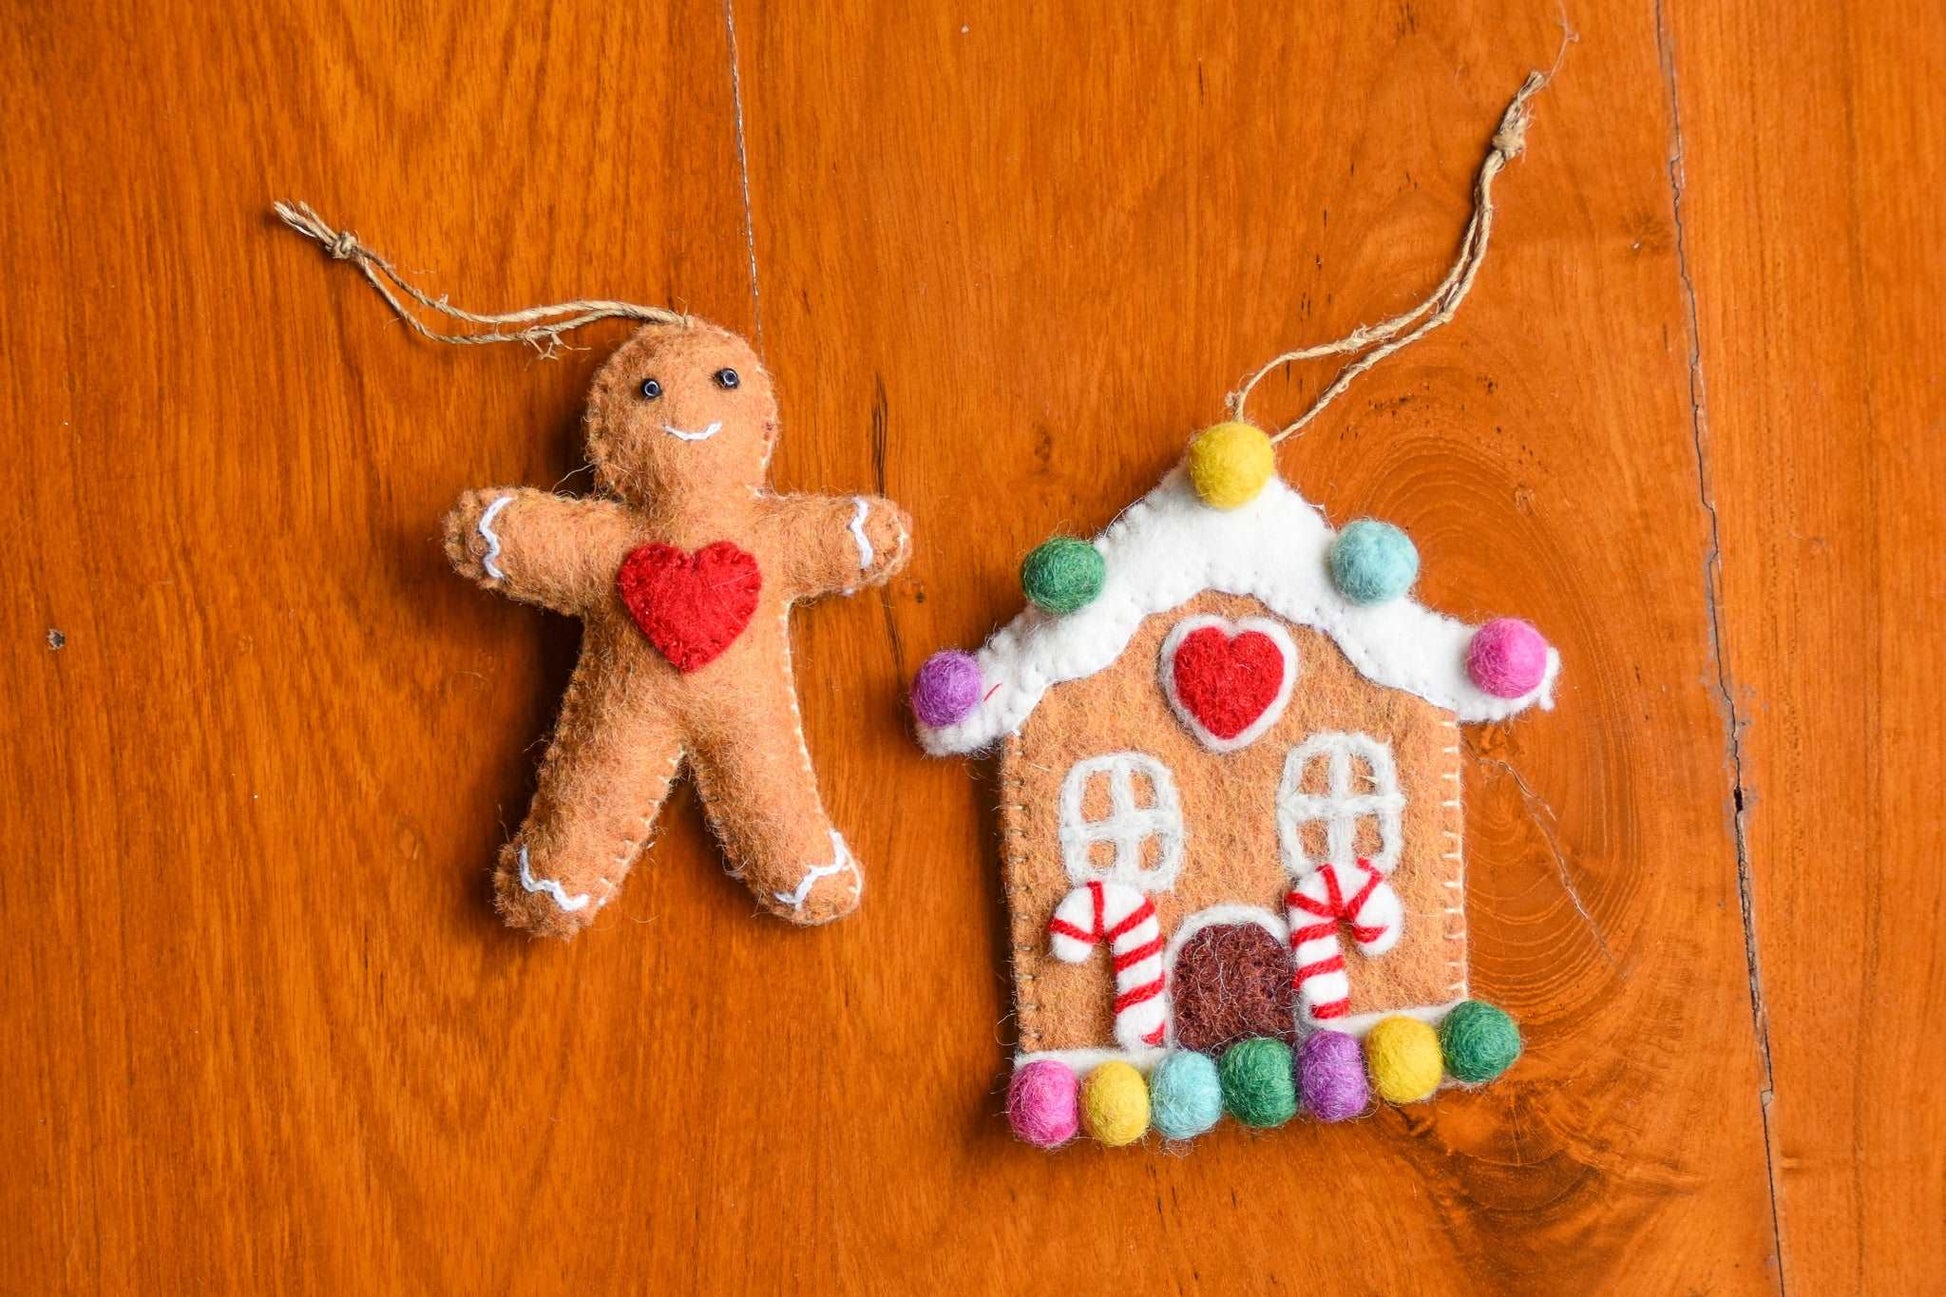 This Global Groove Life, handmade, ethical, fair trade, eco-friendly, sustainable, red heart gingerbread house and gingerbread friend with red heart felt ornament set was created by artisans in Kathmandu Nepal and will be a warm, colorful and fun addition to your Christmas tree this holiday season.